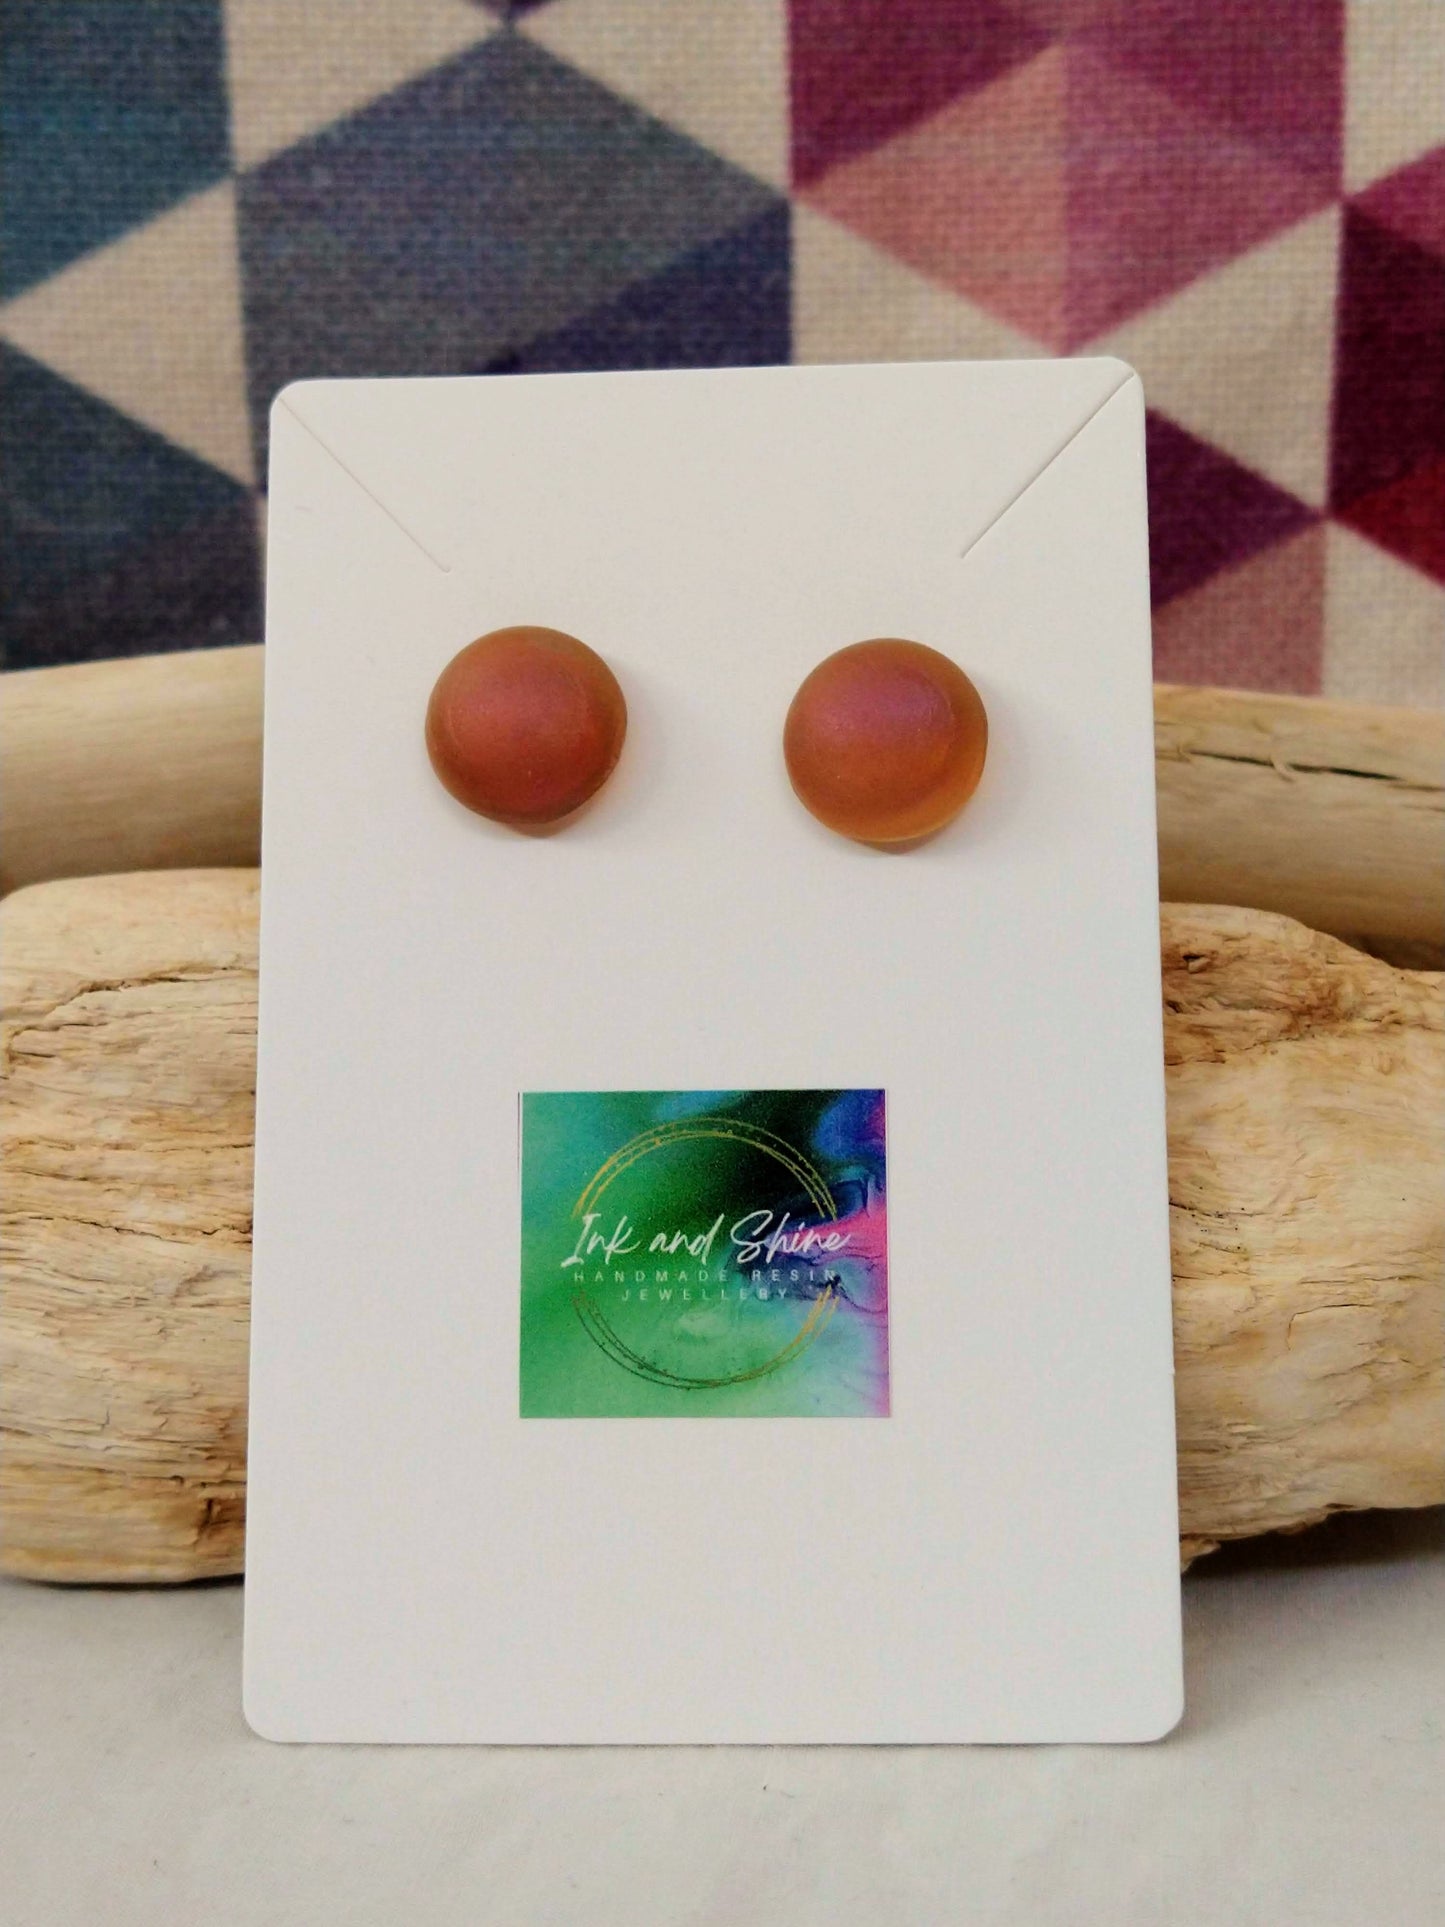 Round Dome Stud Earrings